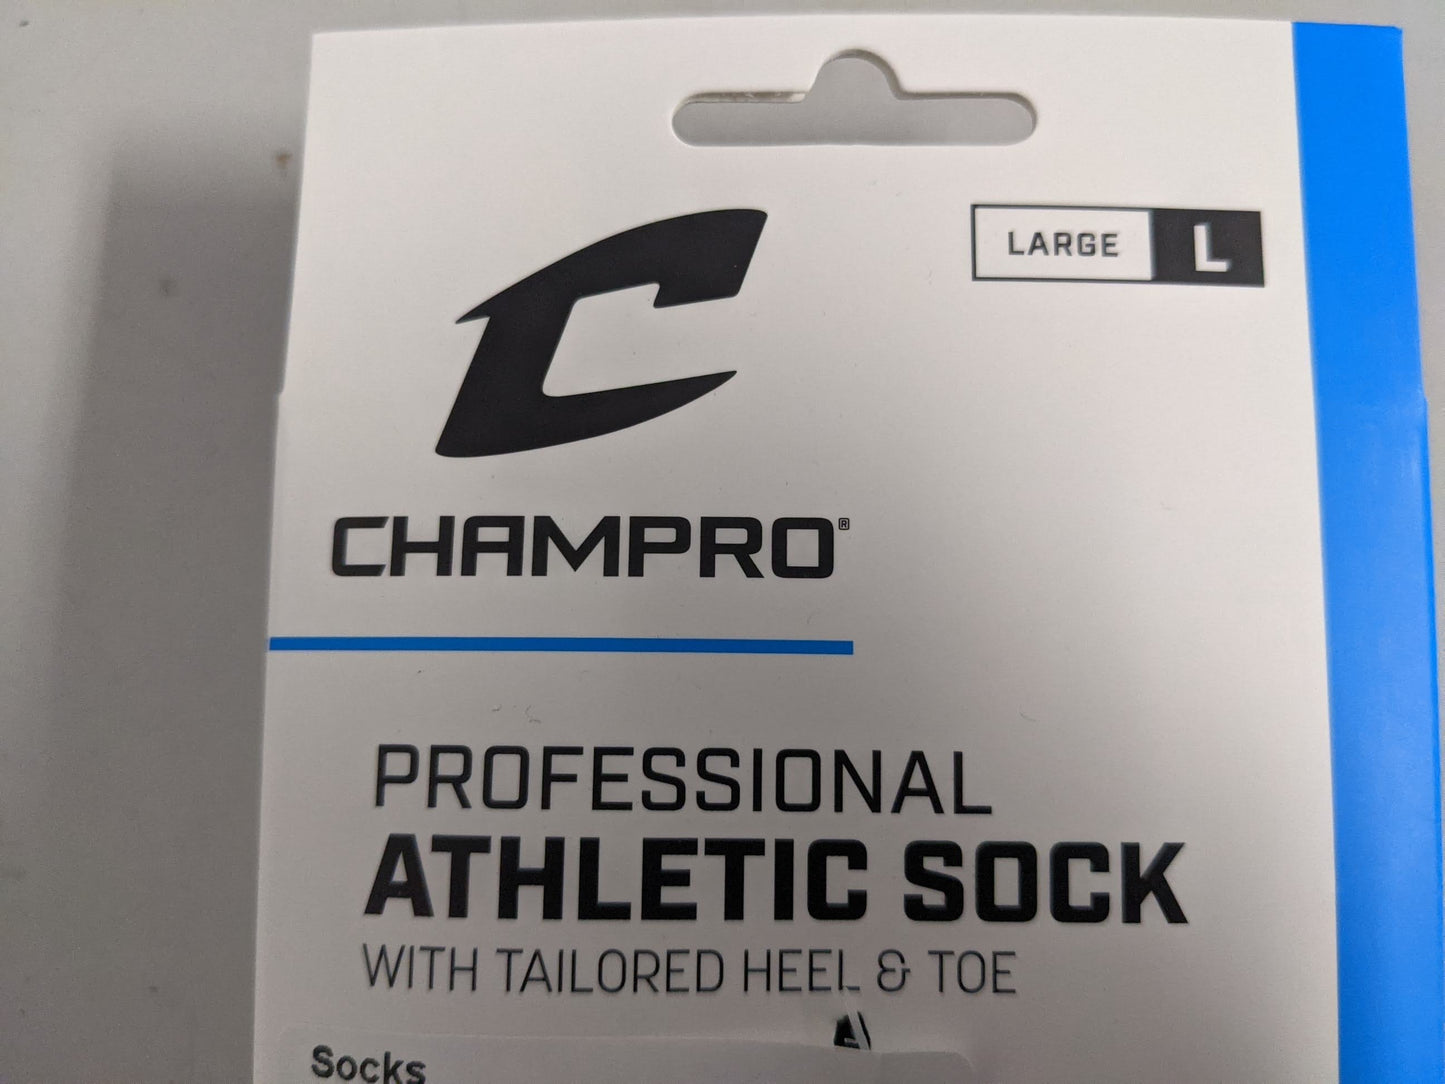 Champro Athletic Socks Size Large Color Forest Green Multi-Sport Condition New